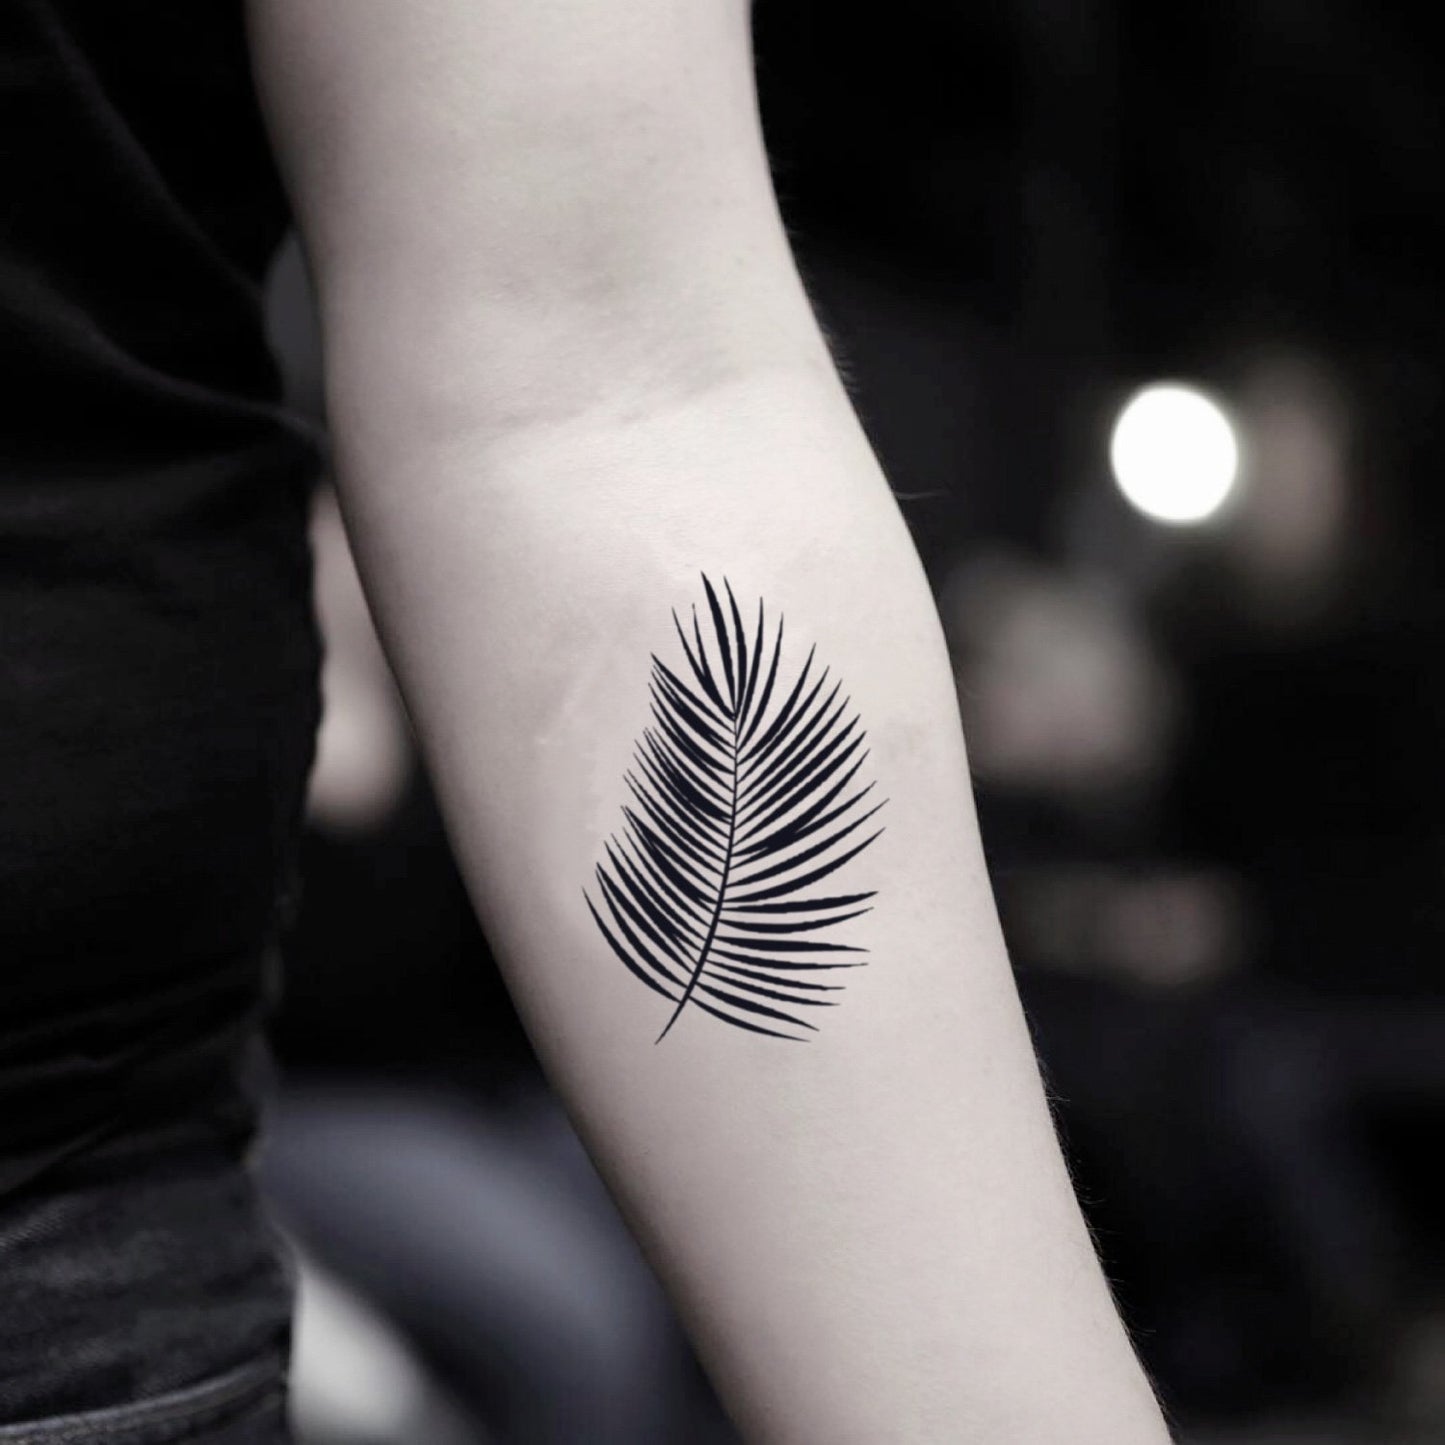 fake small simple palm banana leaf fern frond nature temporary tattoo sticker design idea on inner arm